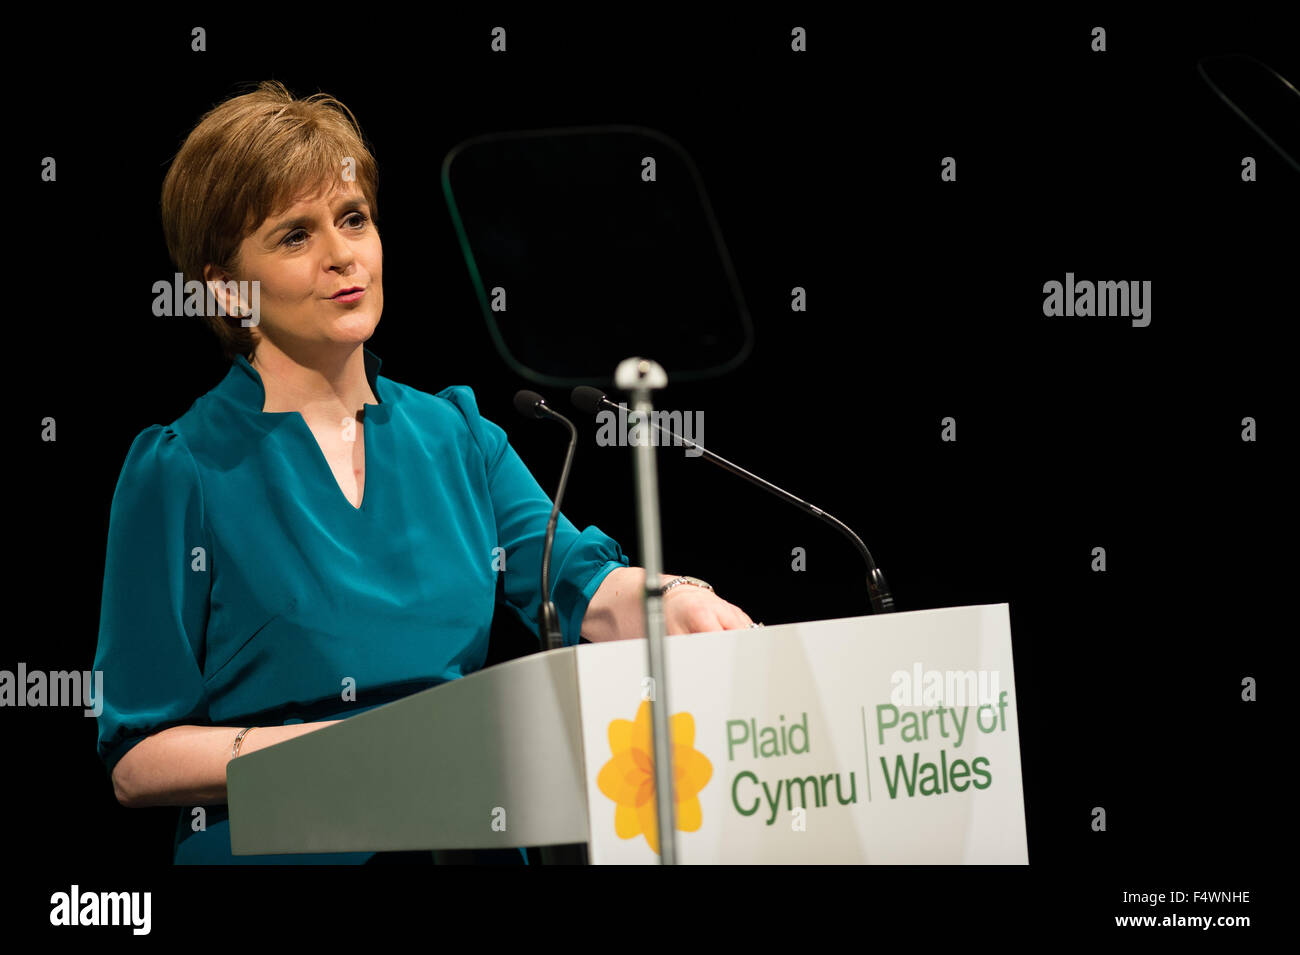 Aberystwyth Wales UK, Friday 23 October 2015  UK Politics: Scotland's First Minister and leader of the Scottish Nationalist Party  NICOLA STURGEON speaking at Plaid Cymru’s annual conference, held this year at Aberystwyth Wales UK   Photo © Keith Morris Stock Photo